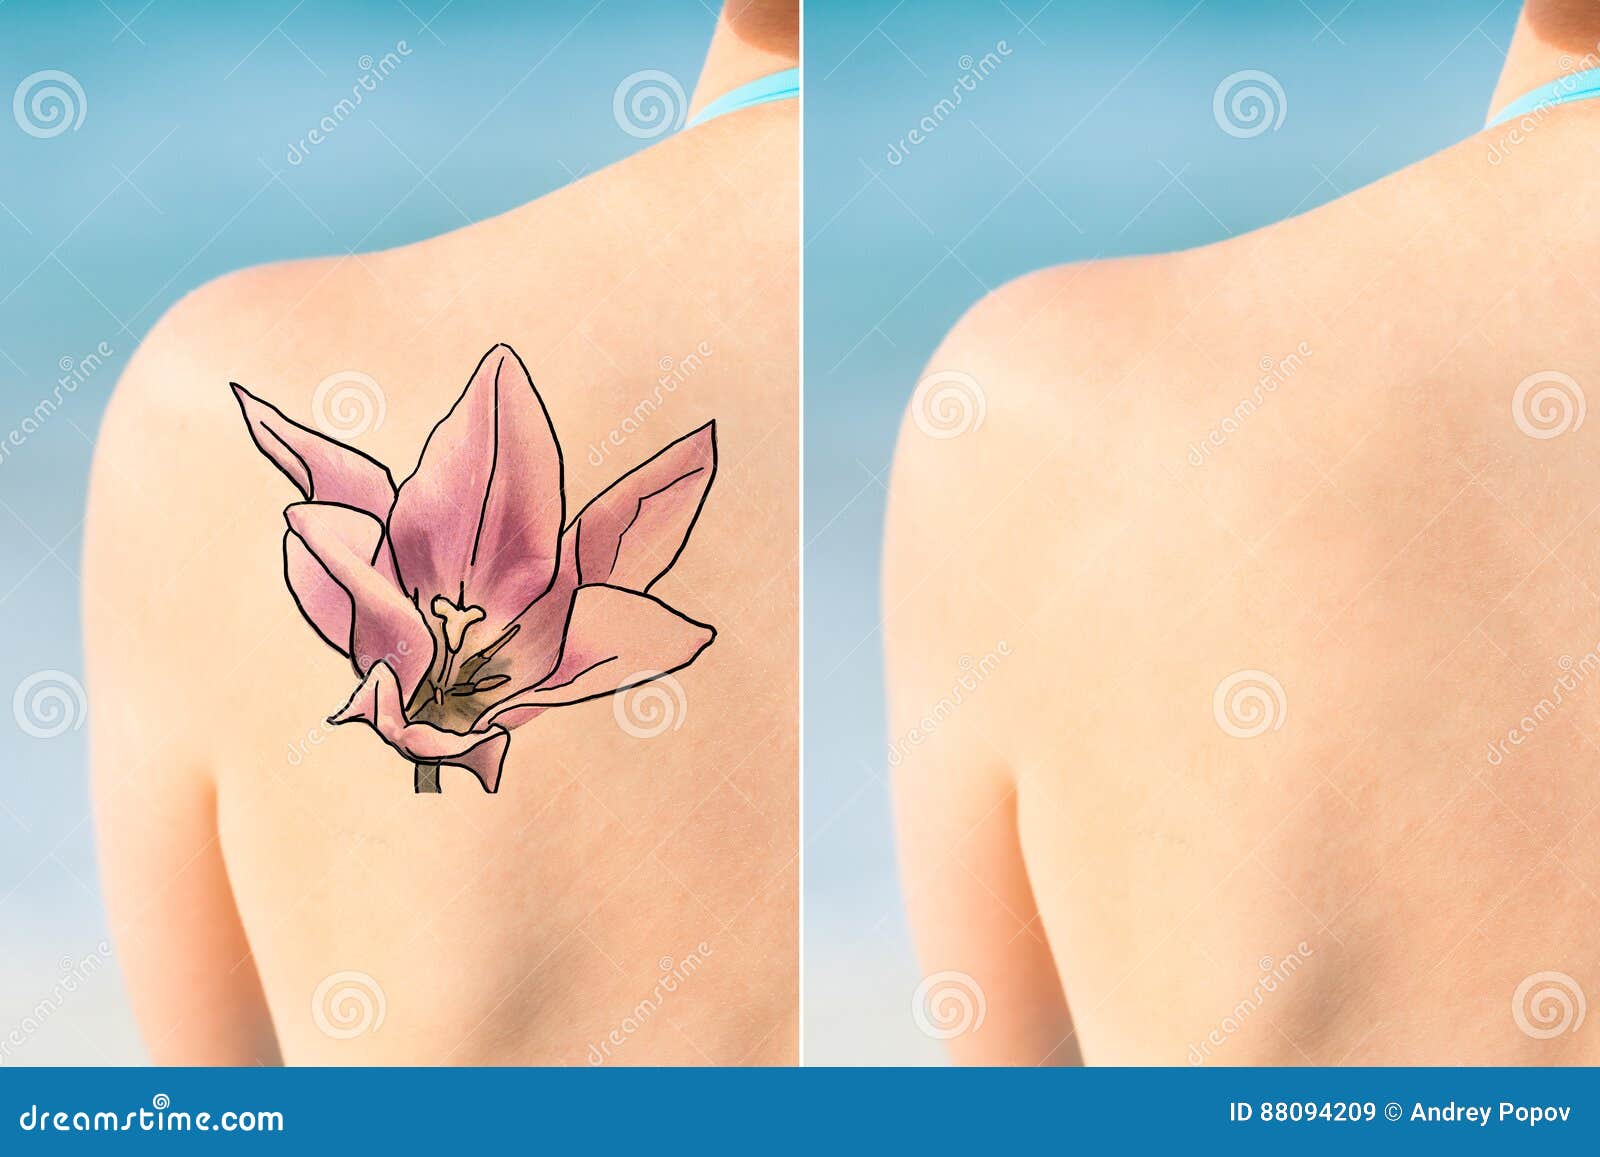 GO! Tattoo Removal